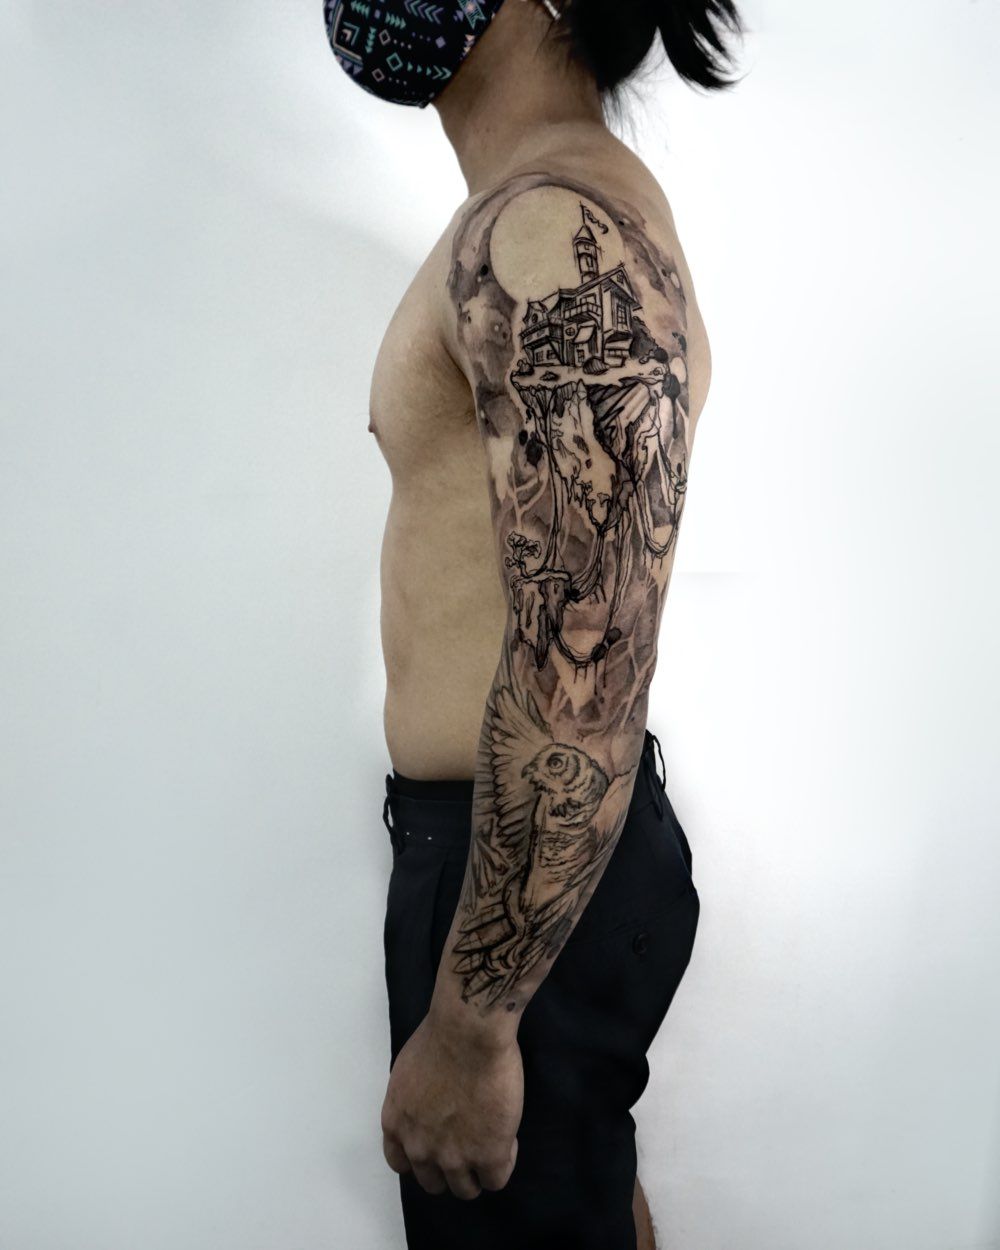 Sleeve Tattoo Ideas: Inspiring Designs for Inked Arms (248 Ideas) | Inkbox™